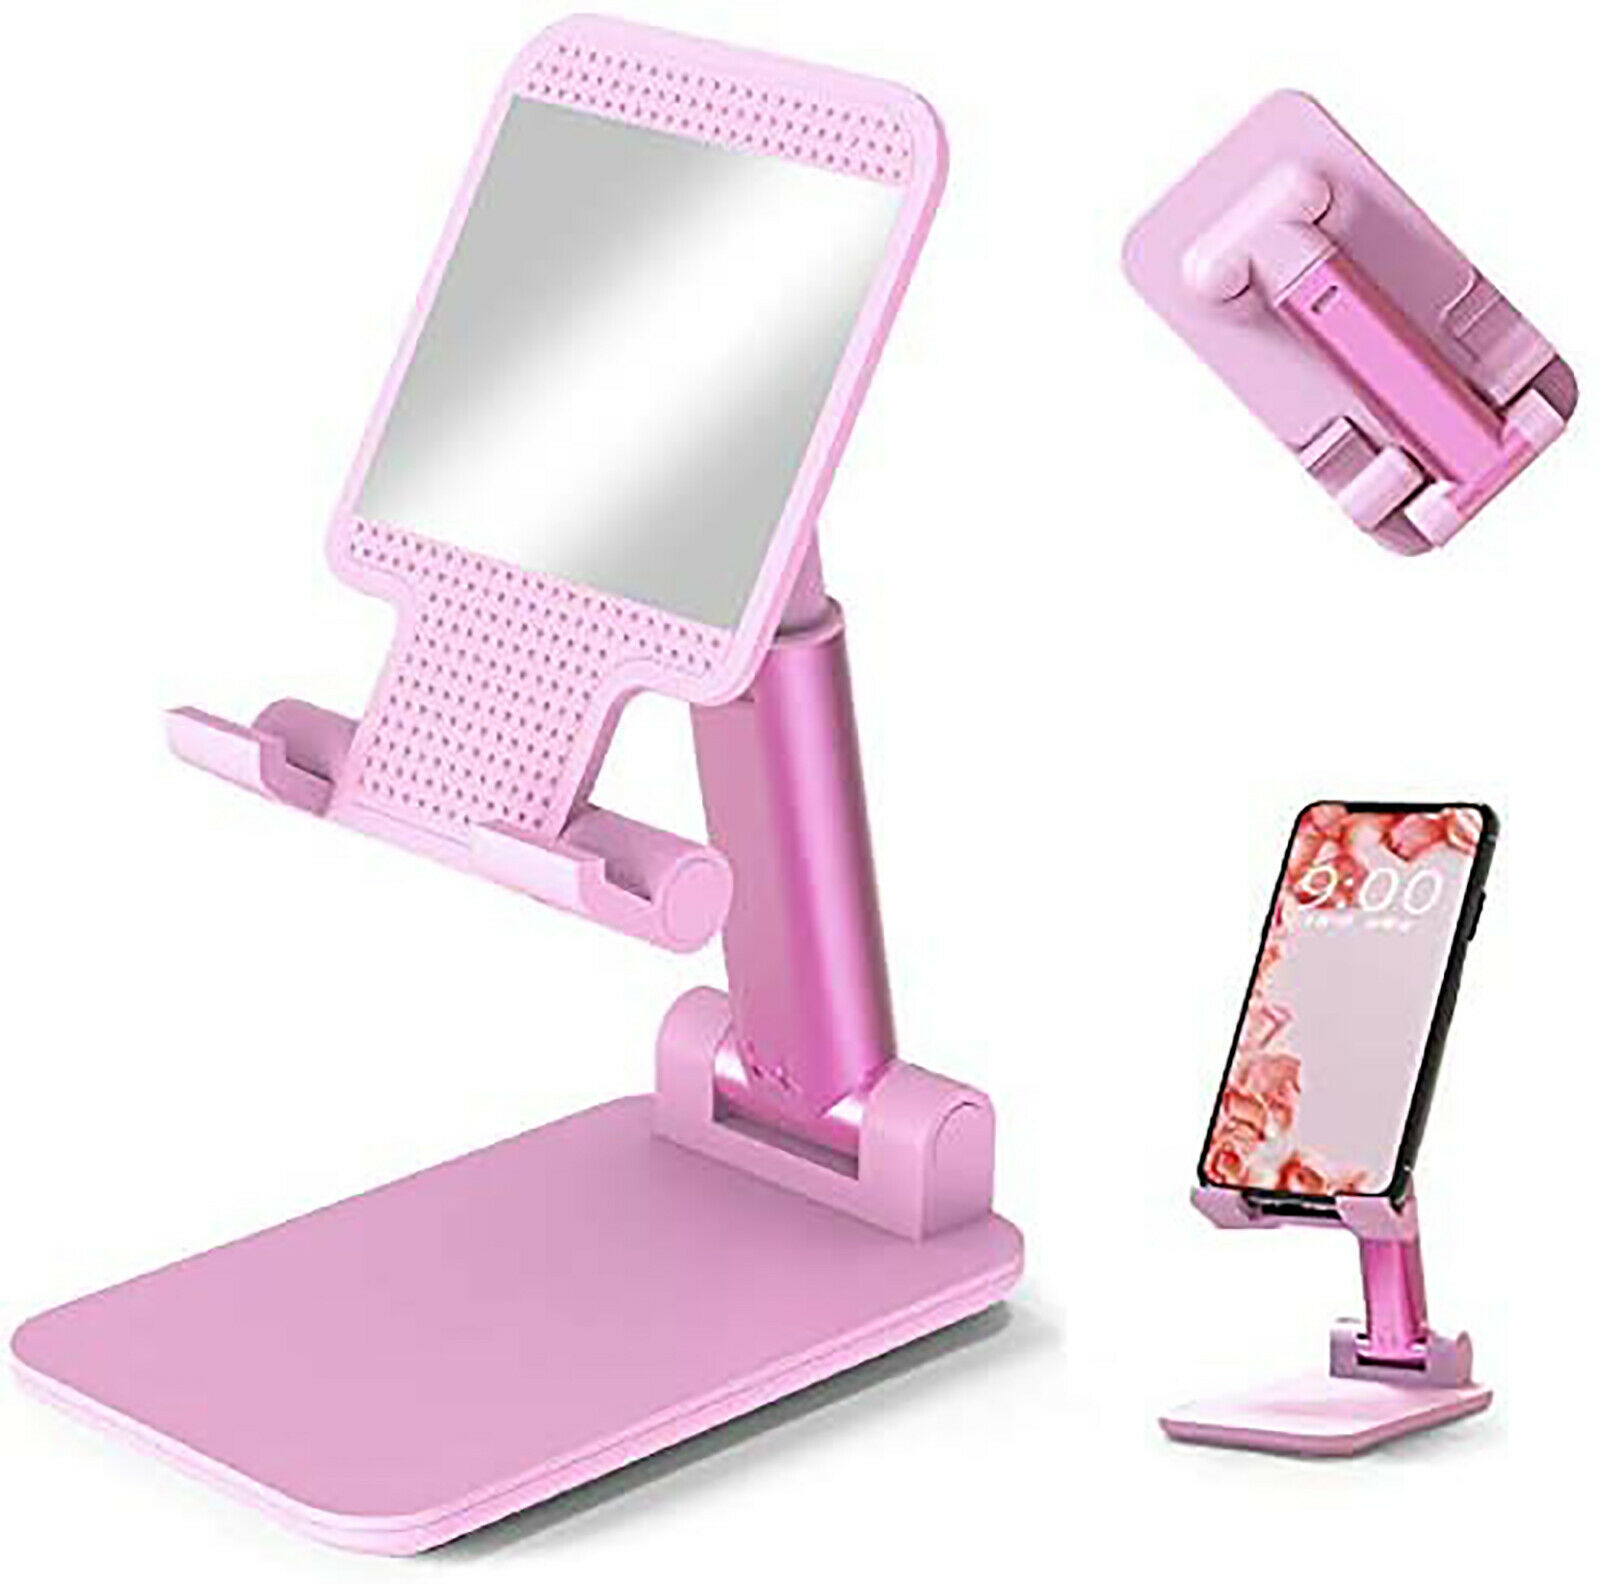 Mobile Phone Holder Stand Desktop Table Desk Mount For iPhone iPad Portable with Mirror